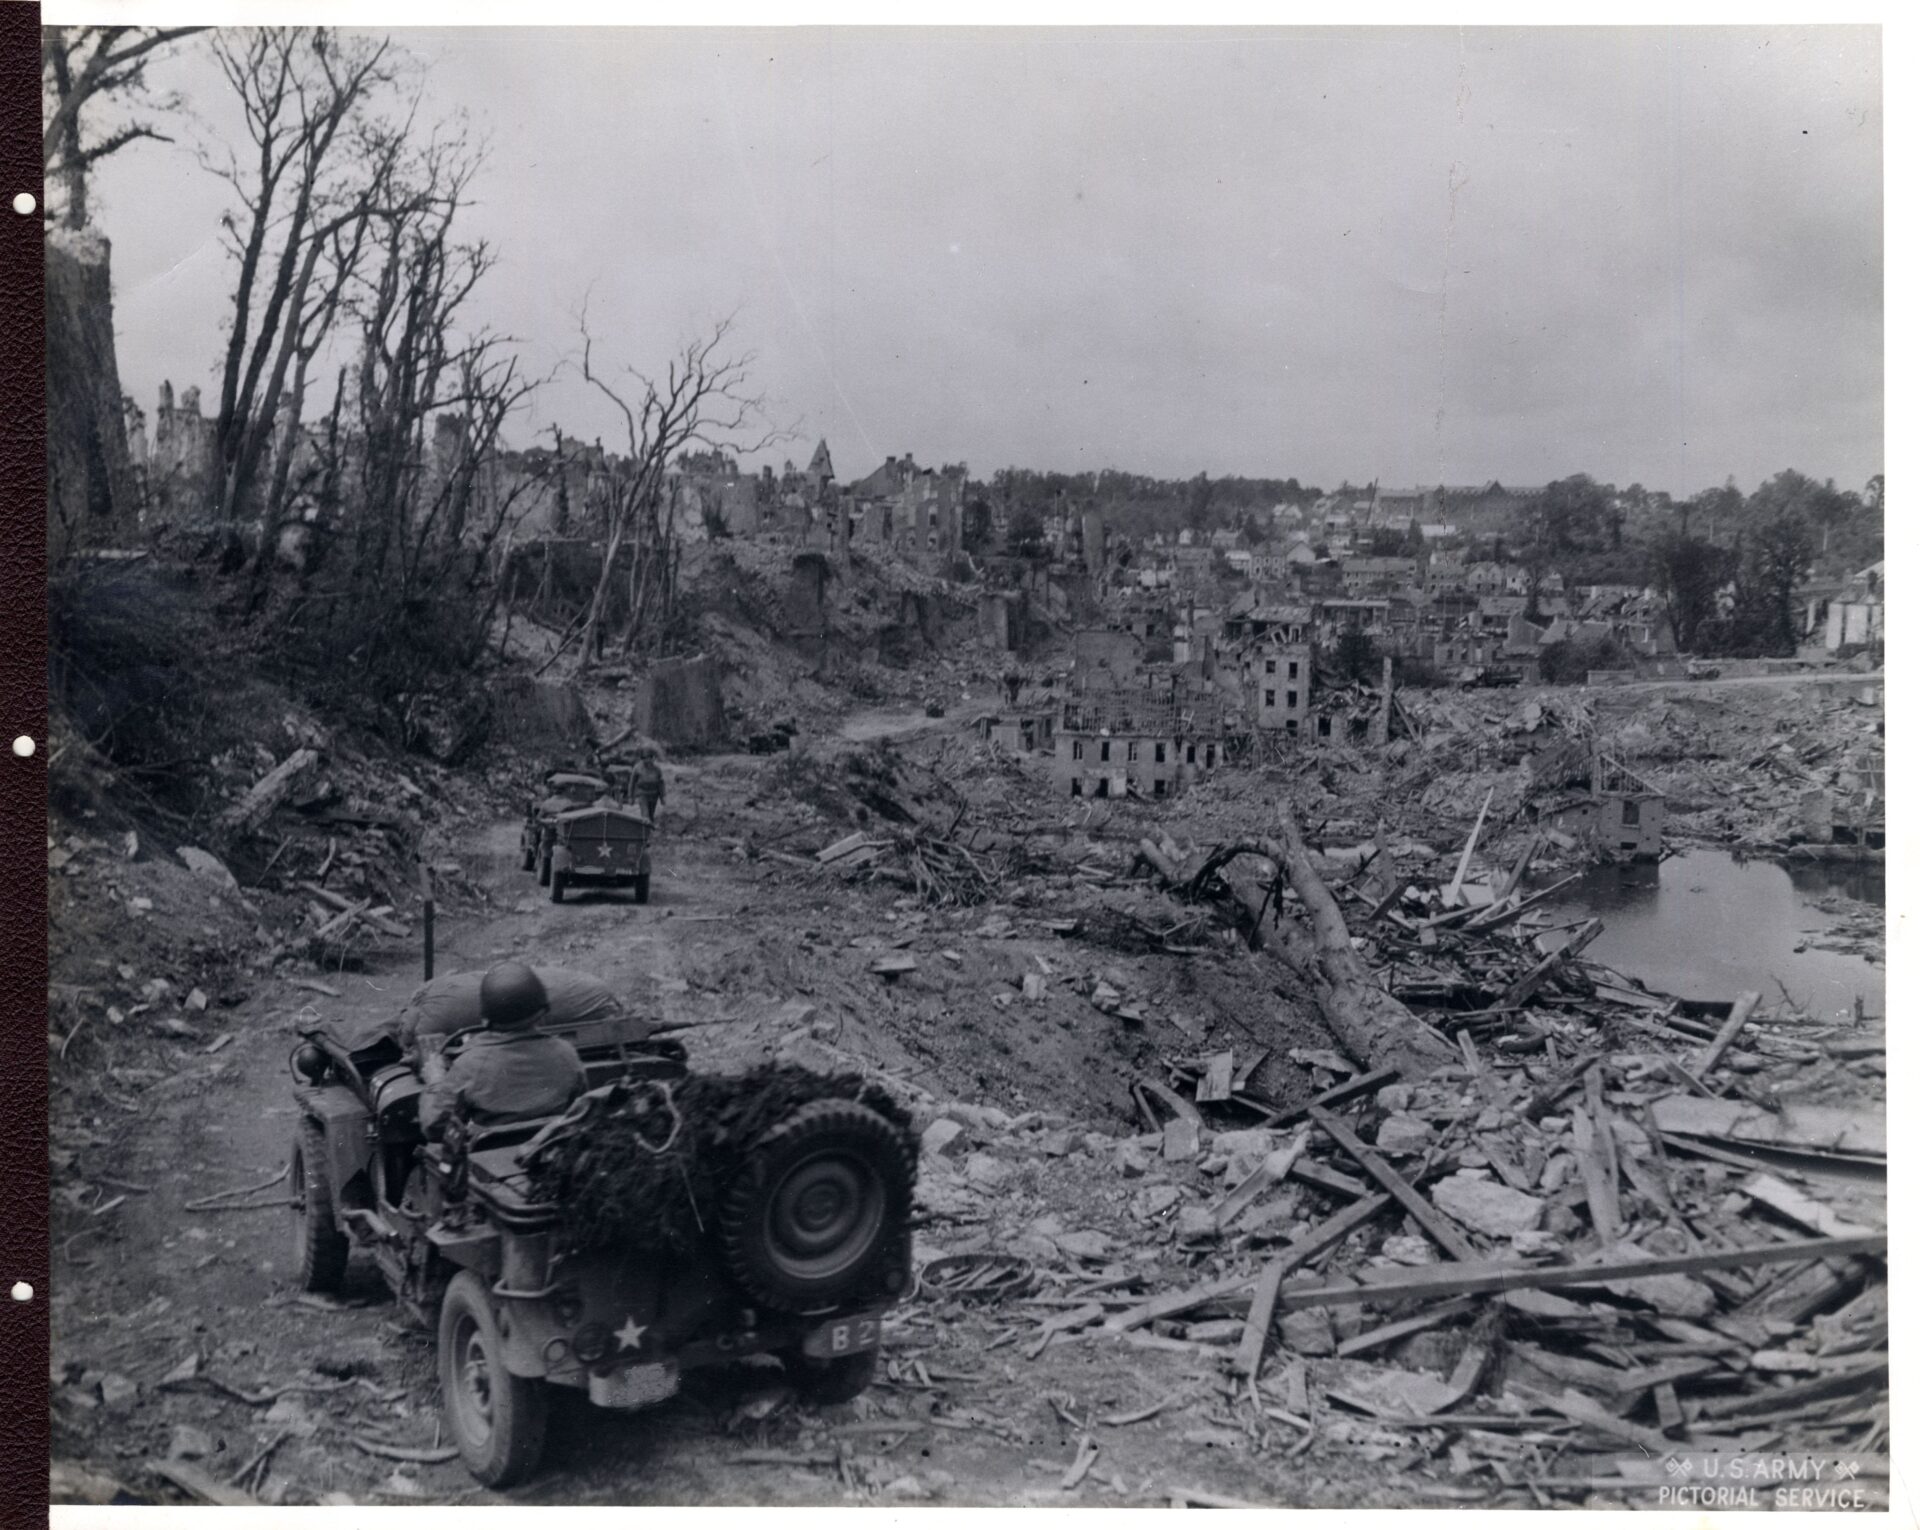 Soldiers investigate the ruins of a wrecked building